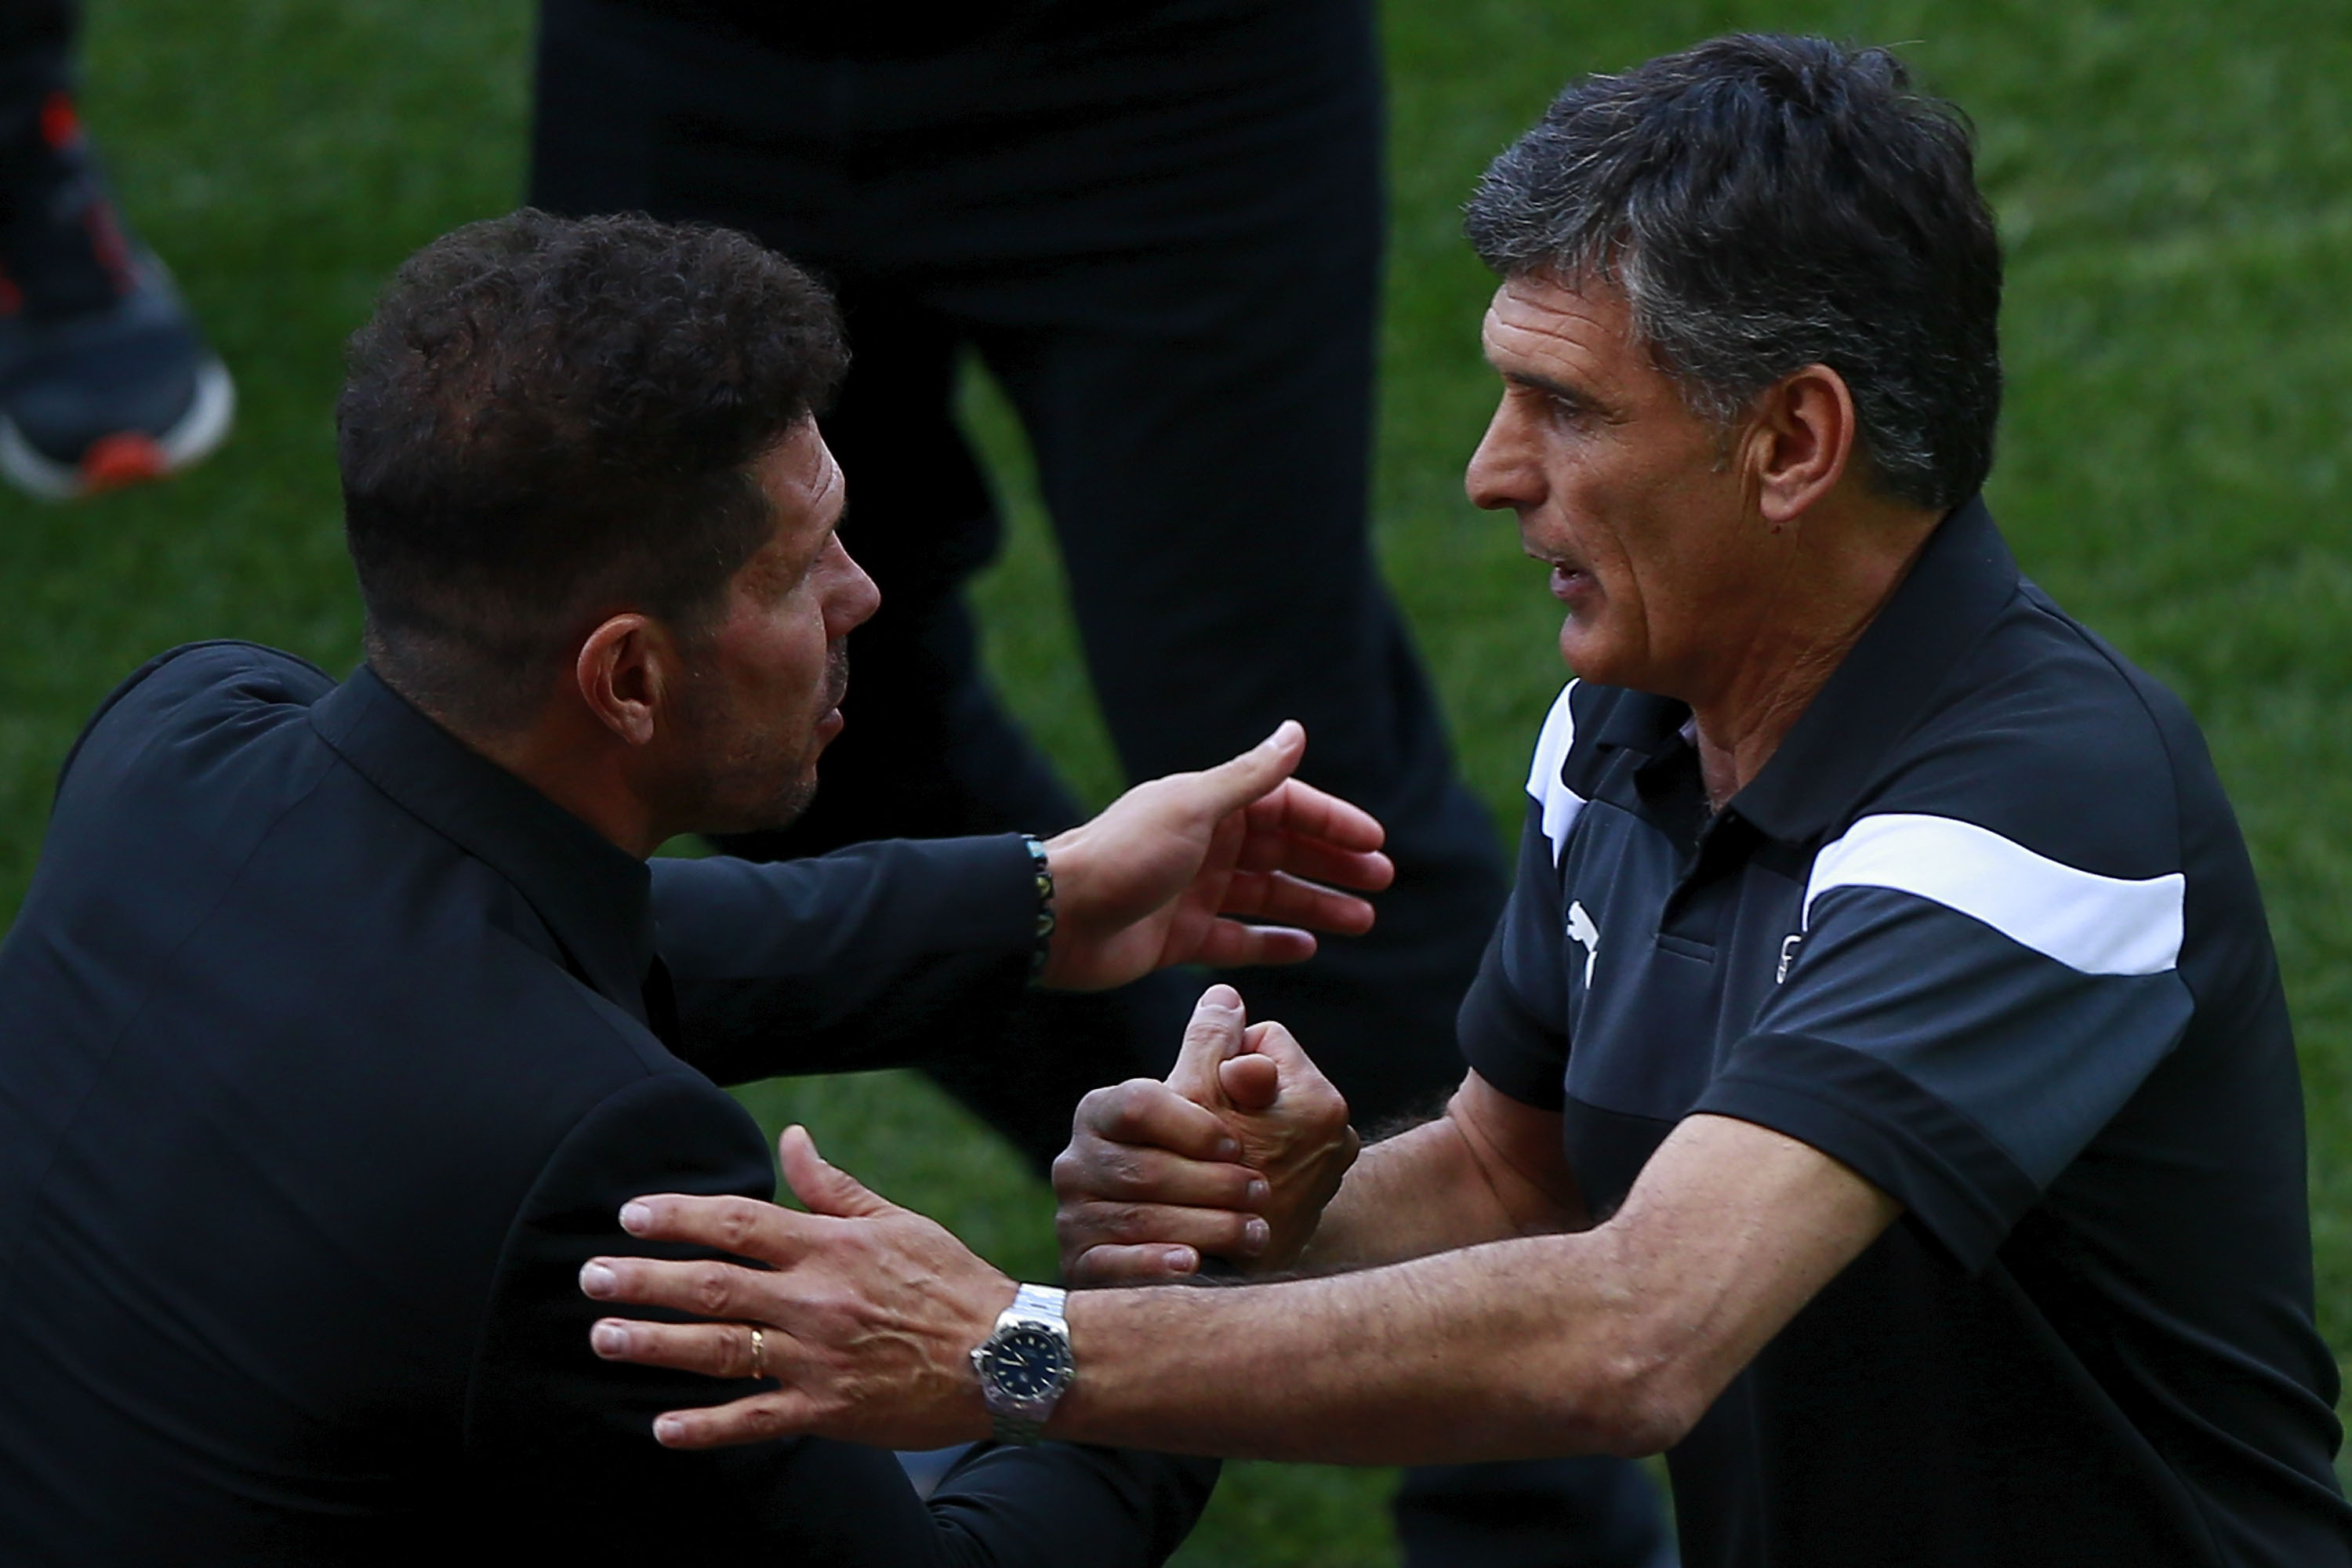 MADRID, SPAIN - MAY 06:  Head coach Diego Pablo Simeone (L) of Atletico de Madrid shakes hands with coach Jose Luis Mendilibar (R) of SD Eibar prior to start the La Liga match between Club Atletico de Madrid and SD Eibar at Estadio Vicente Calderon on May 6, 2017 in Madrid, Spain.  (Photo by Gonzalo Arroyo Moreno/Getty Images)